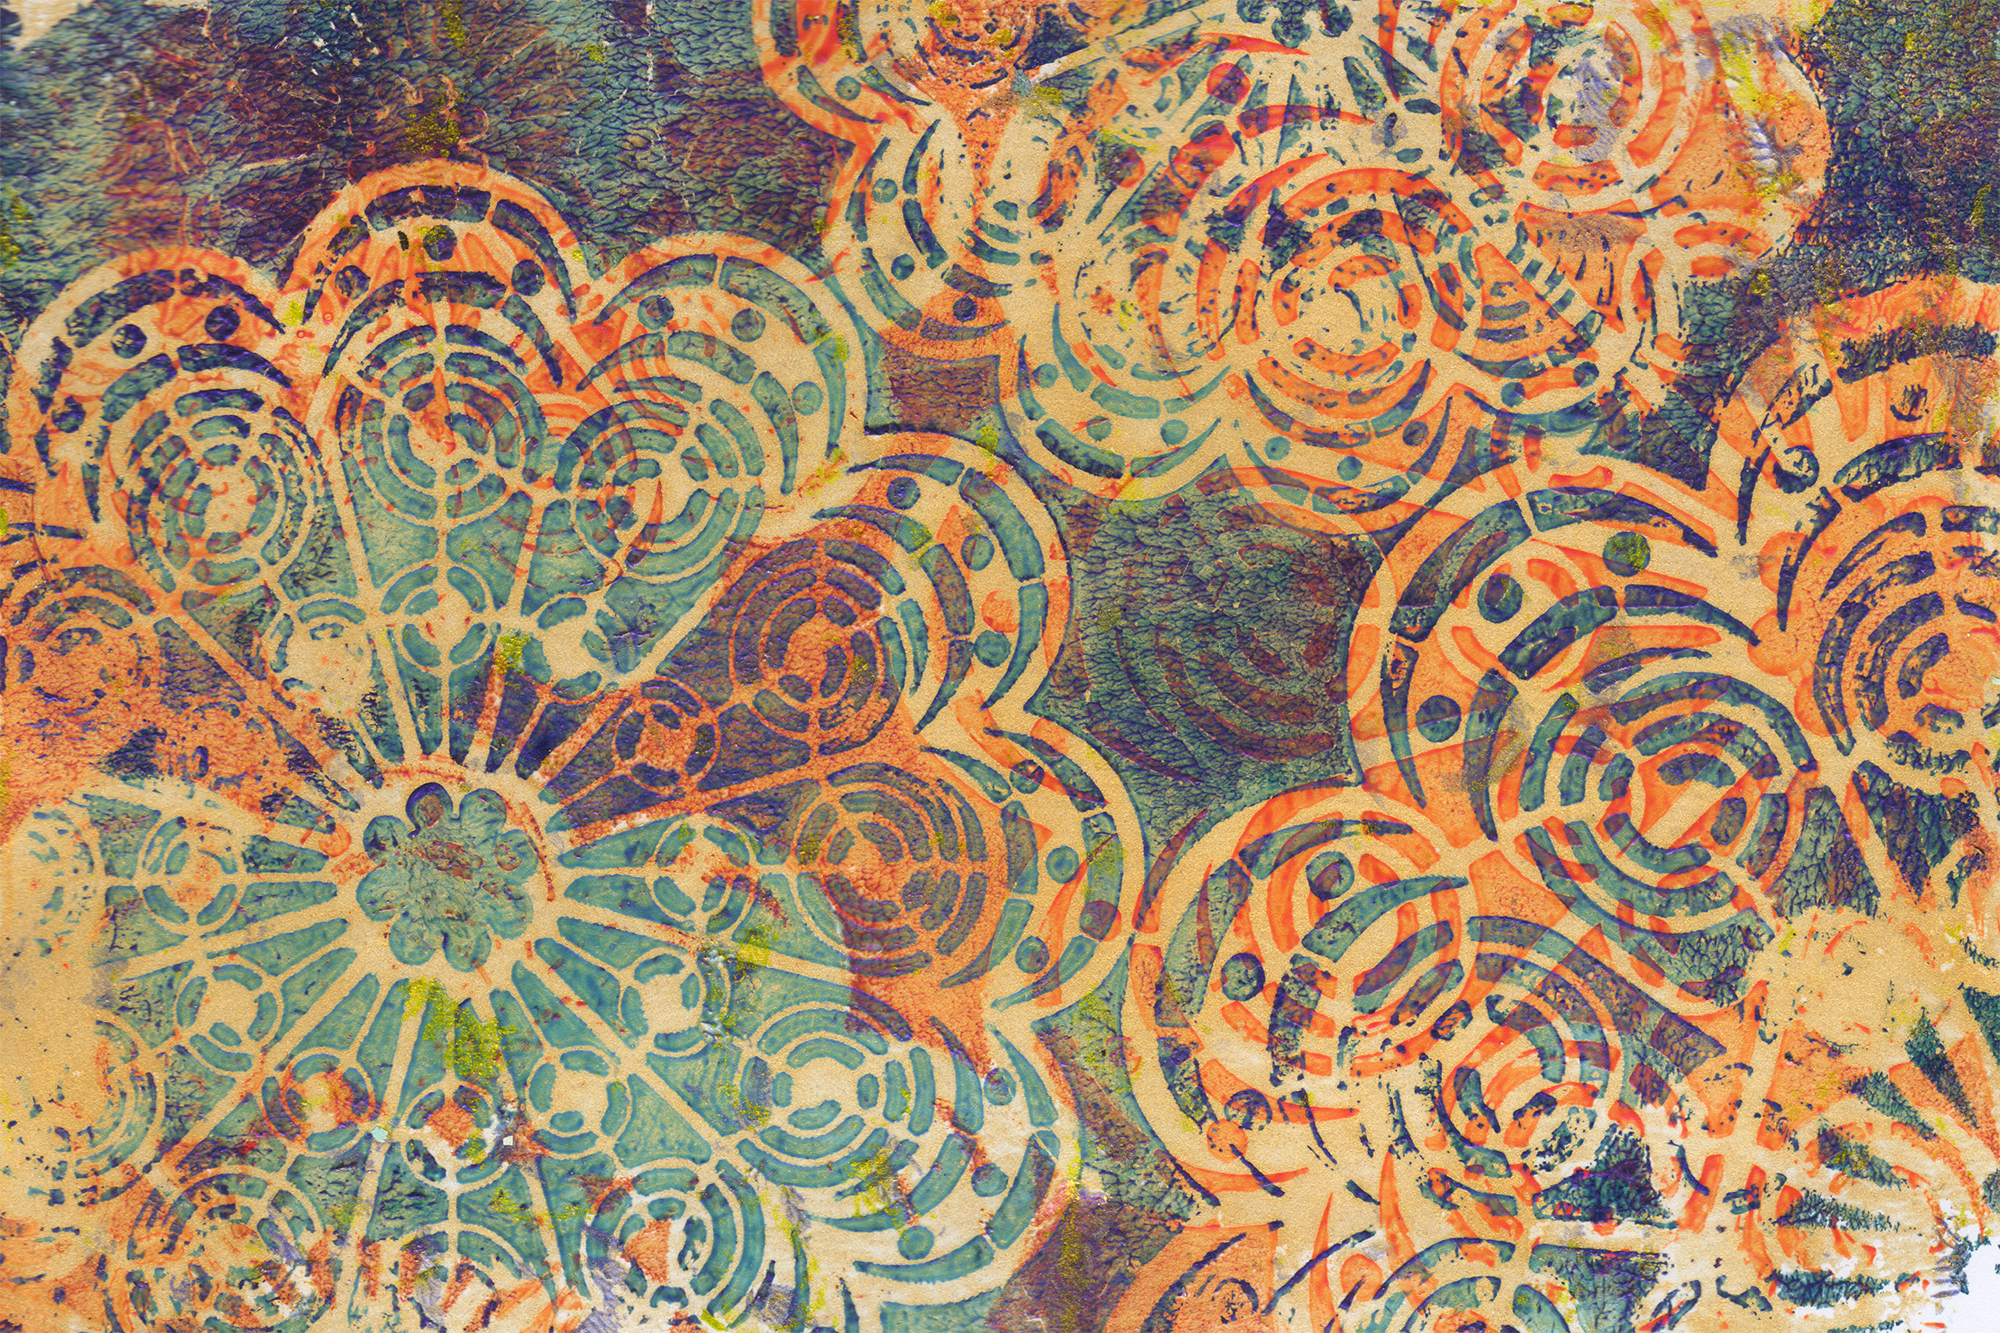 A wild & free painting with a series of patterns that look like lace, atop a freeform mix of colors.